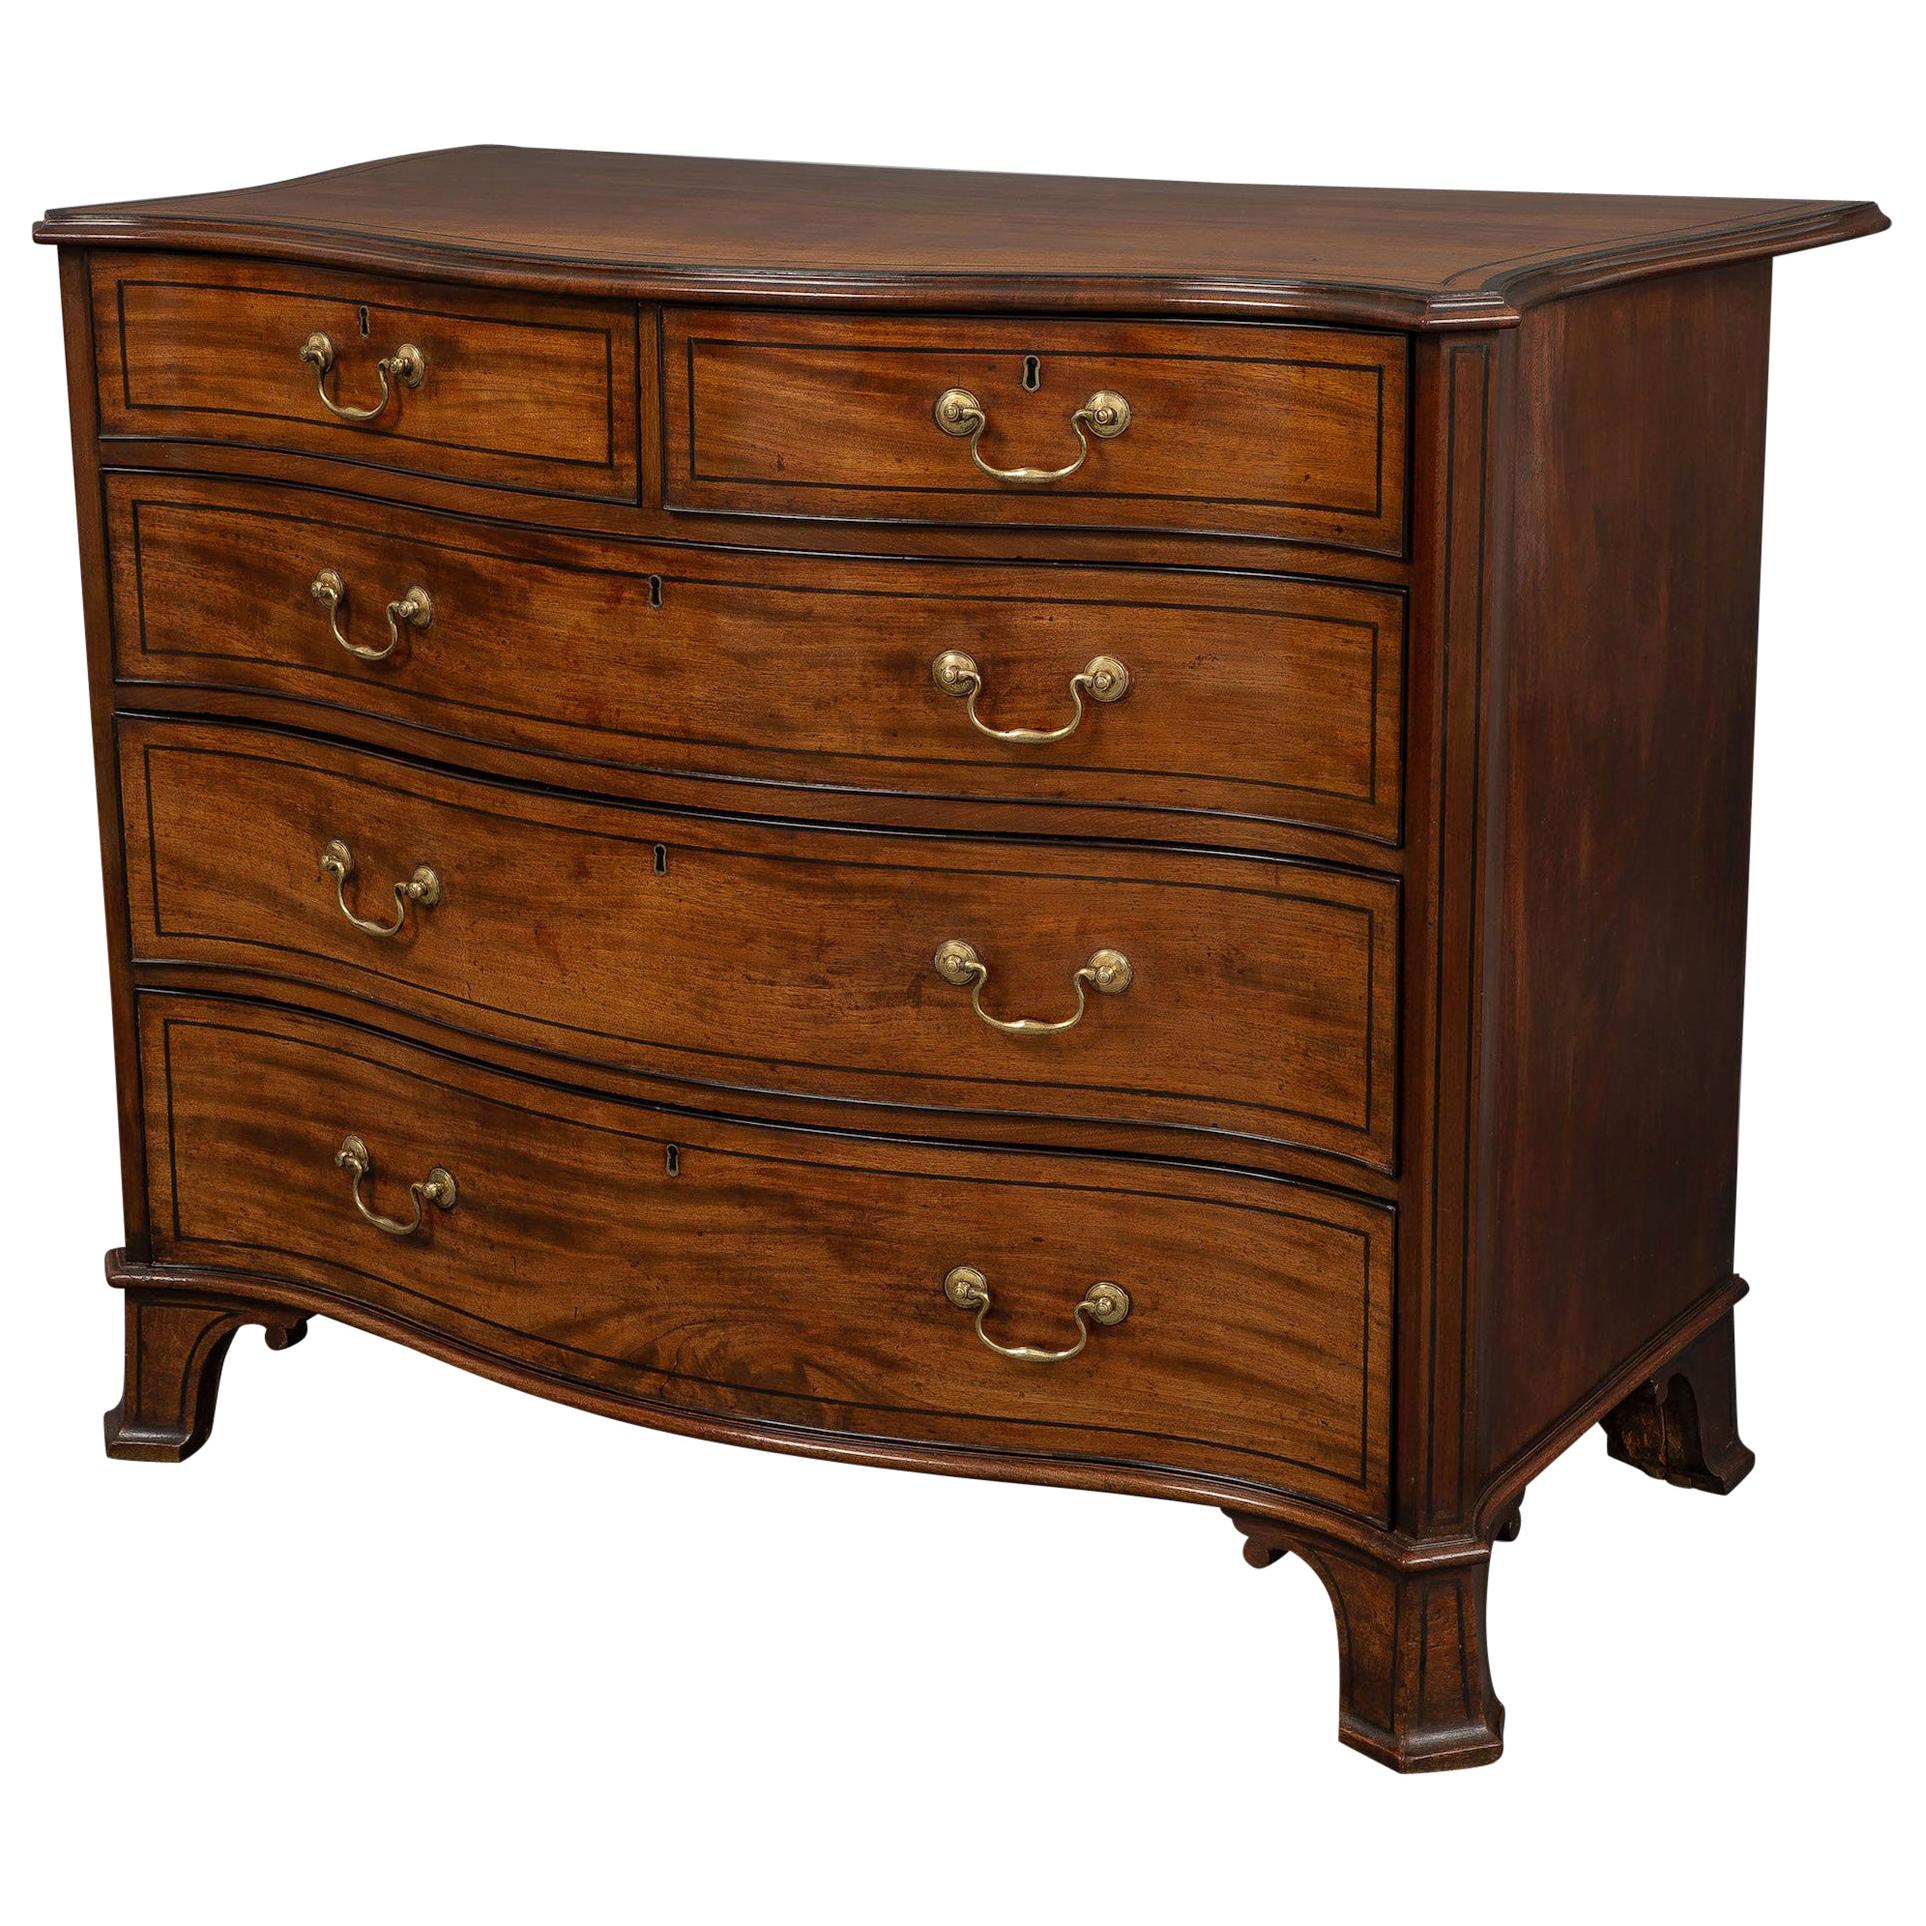 George III Period Serpentine-Fronted Chest of Drawers in the Manner of Thomas For Sale